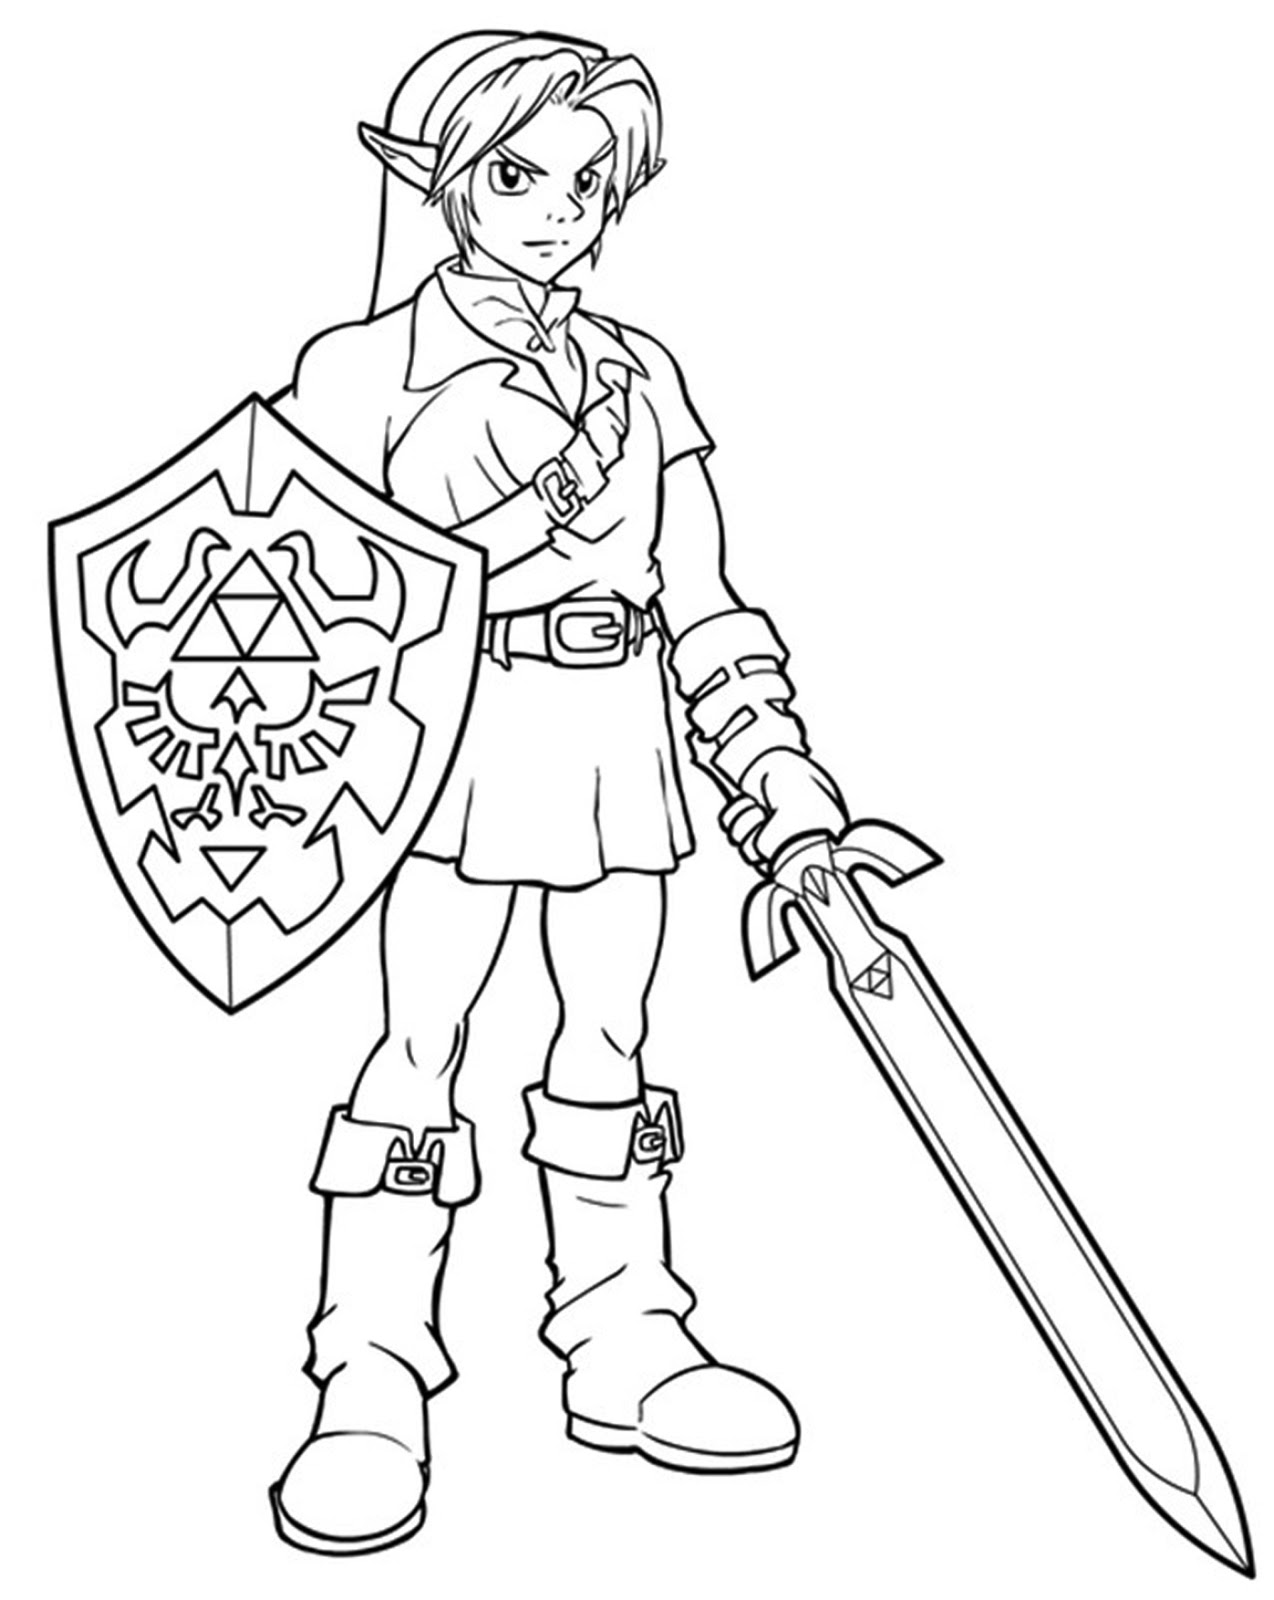 More Adult colouring pages here on gamezplay